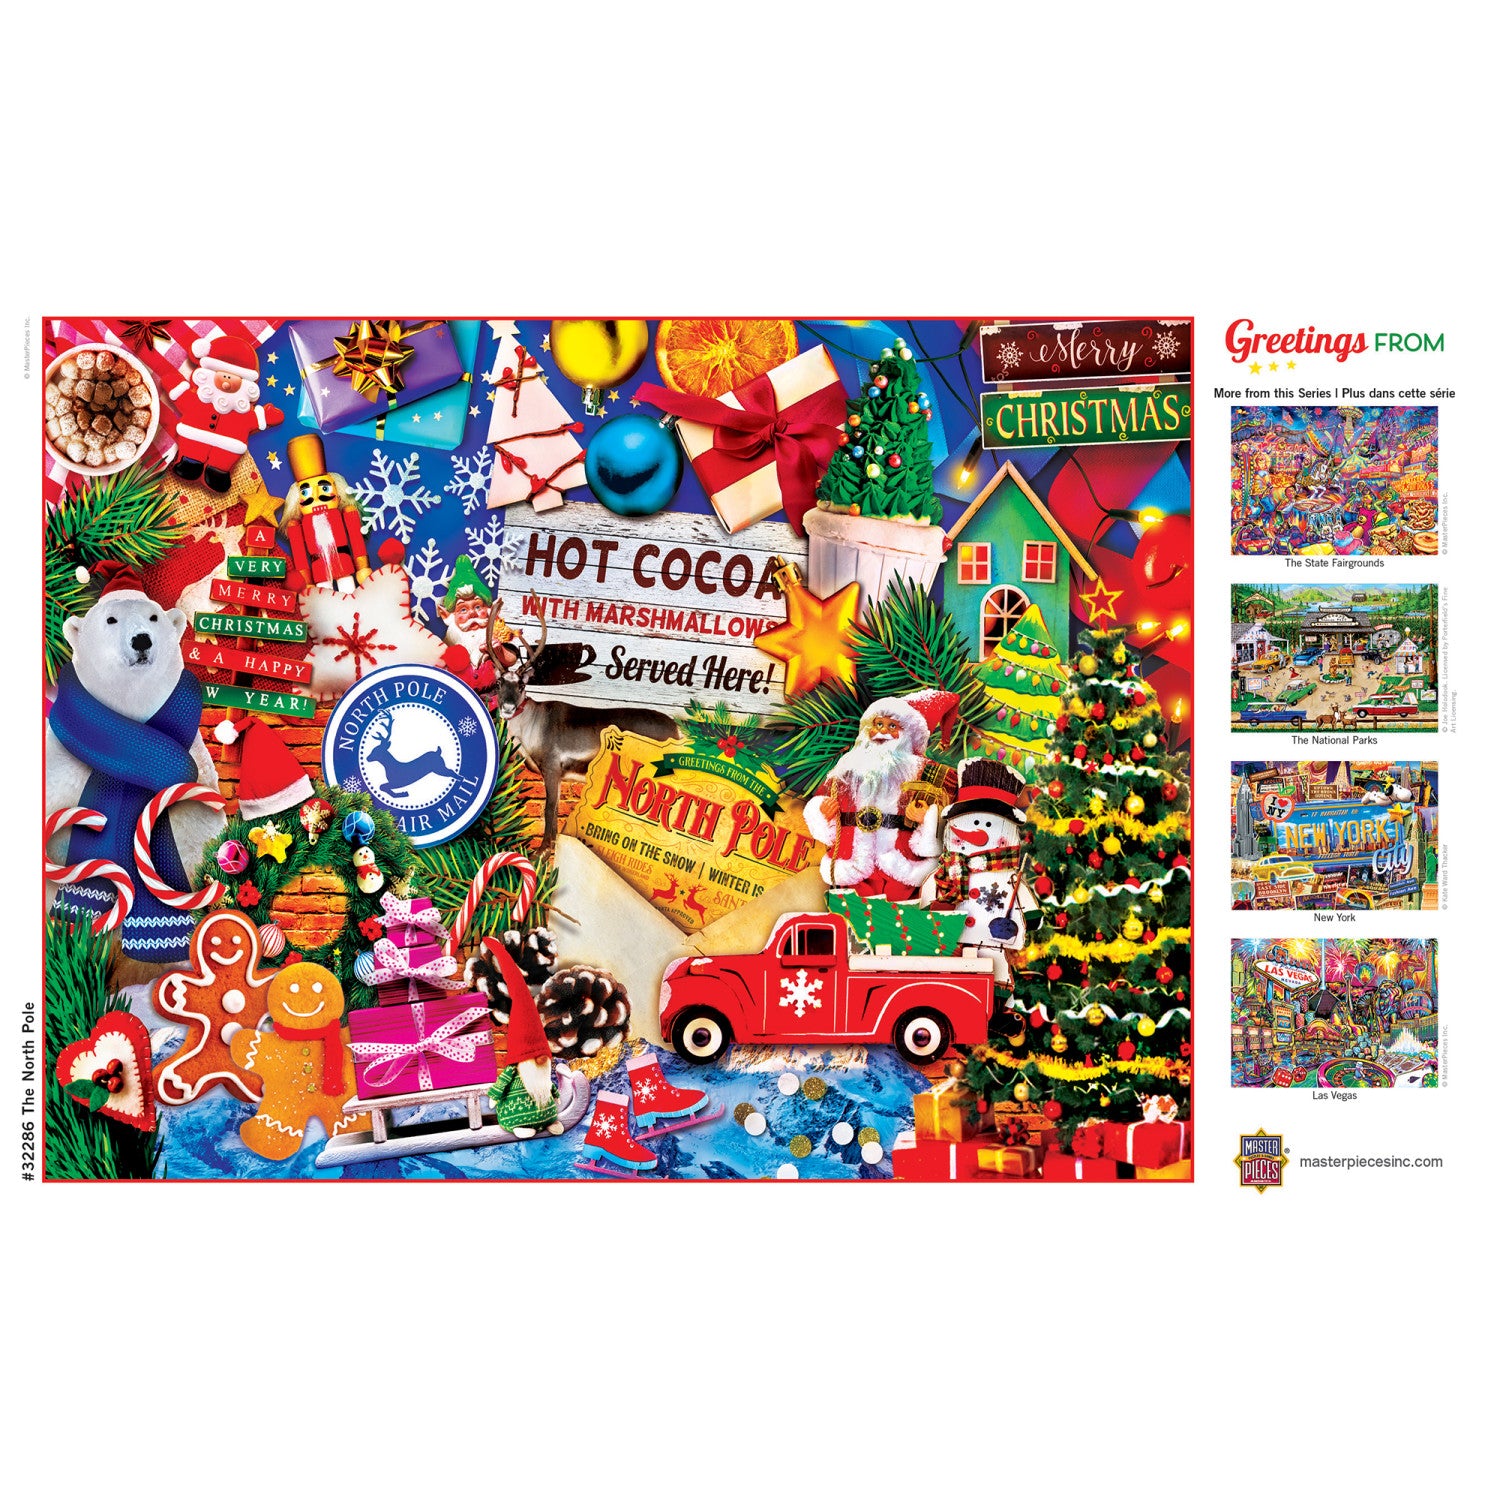 Greetings From The North Pole - 550 Piece Jigsaw Puzzle